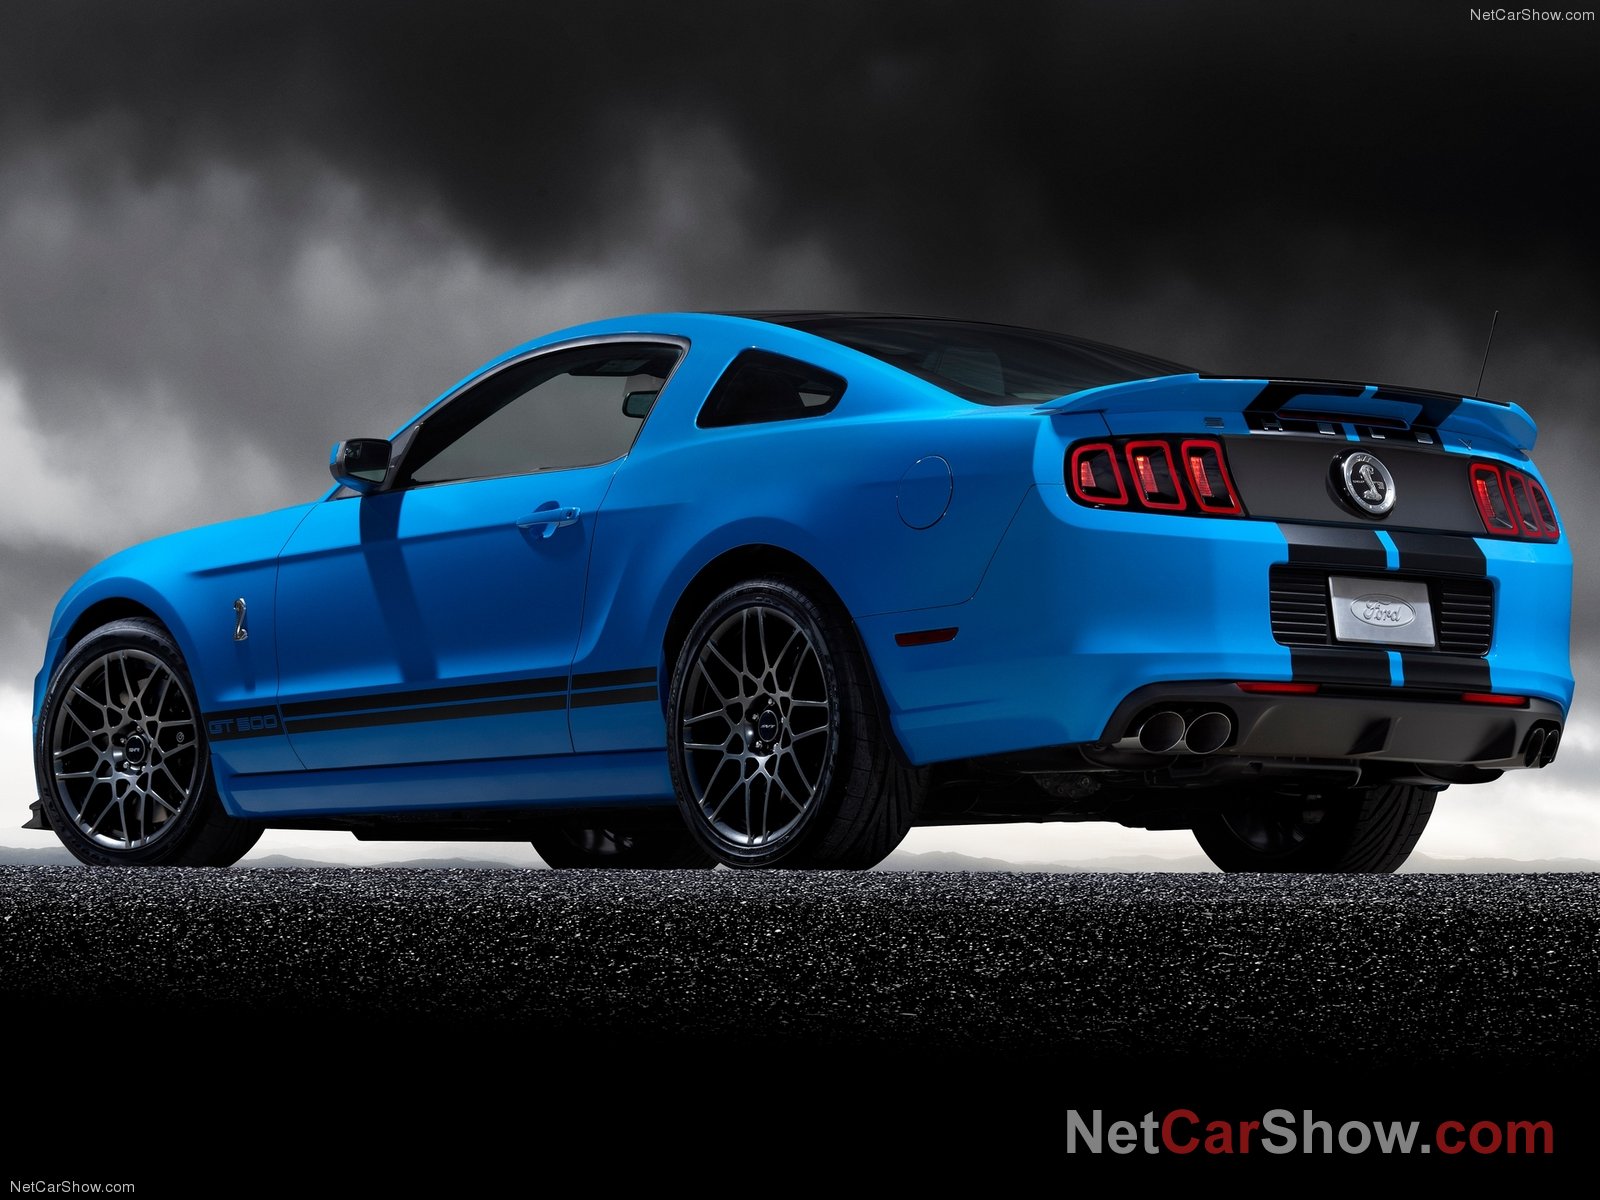 Tapety HD Ford-mustang - Ford-Mustang_Shelby_GT500_2013_1600x1200_wallpaper_06.jpg